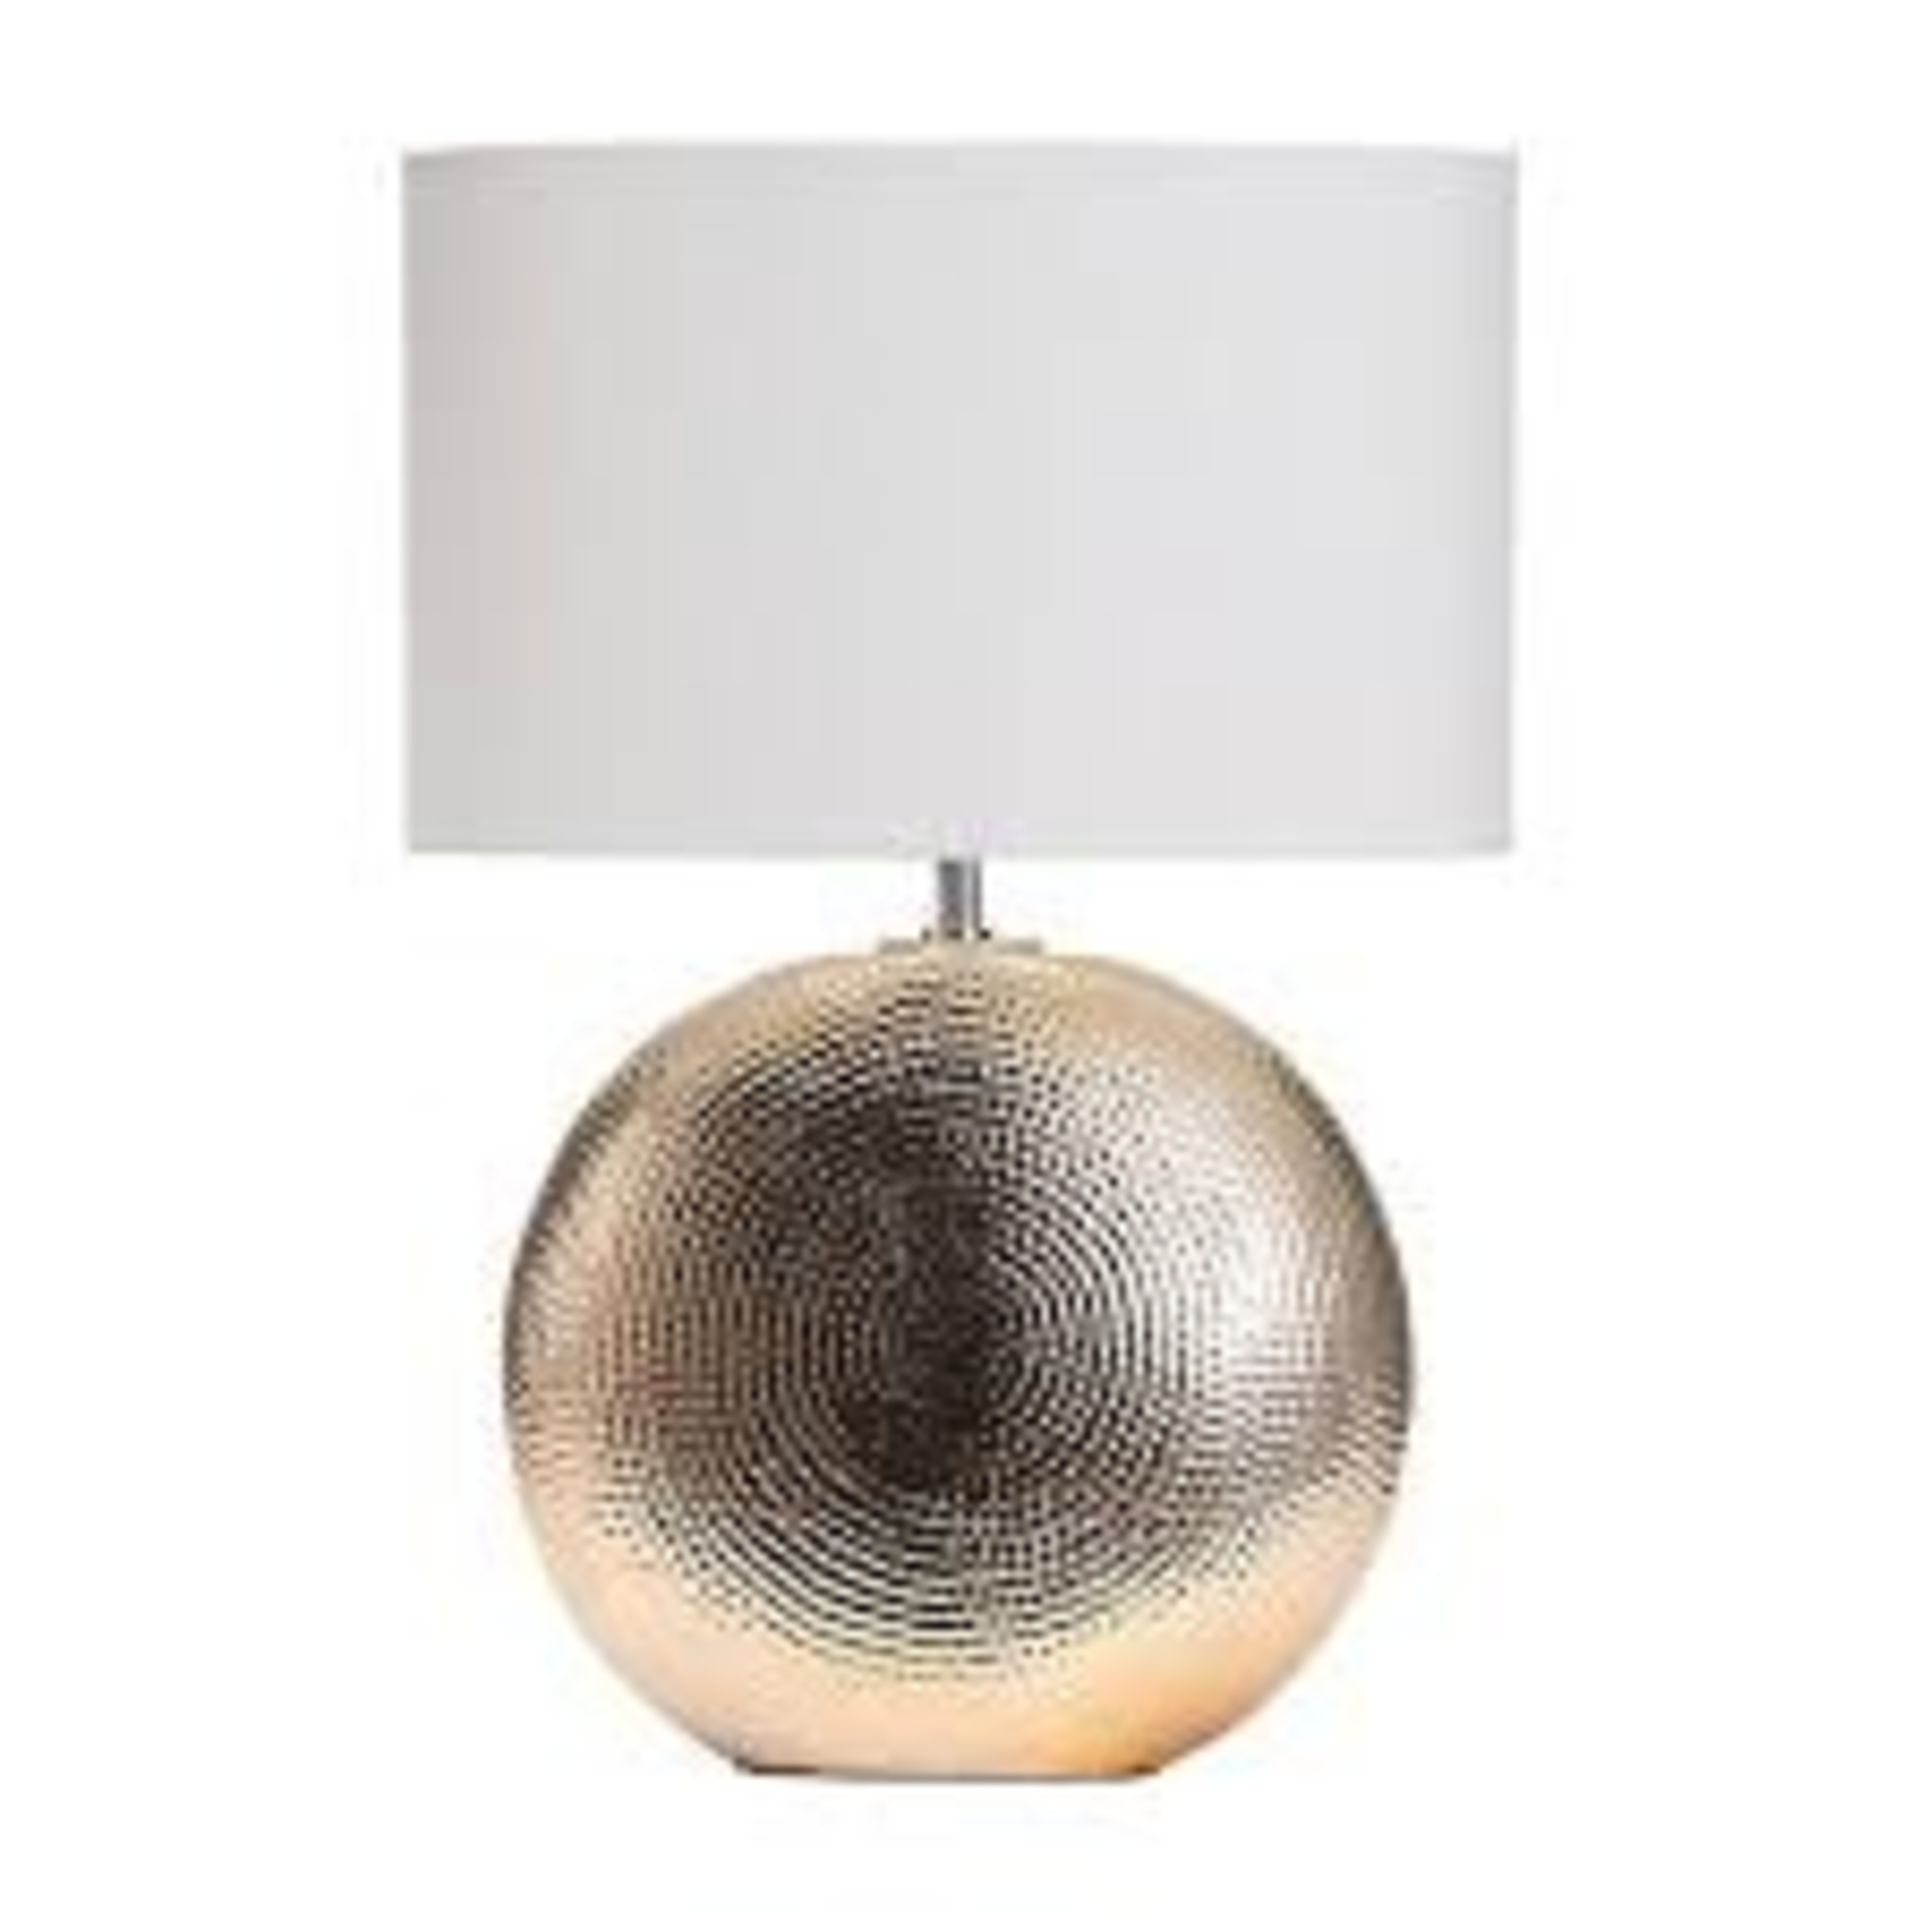 Inlight Locaste Textured Polished gold effect Round Table light - ER48